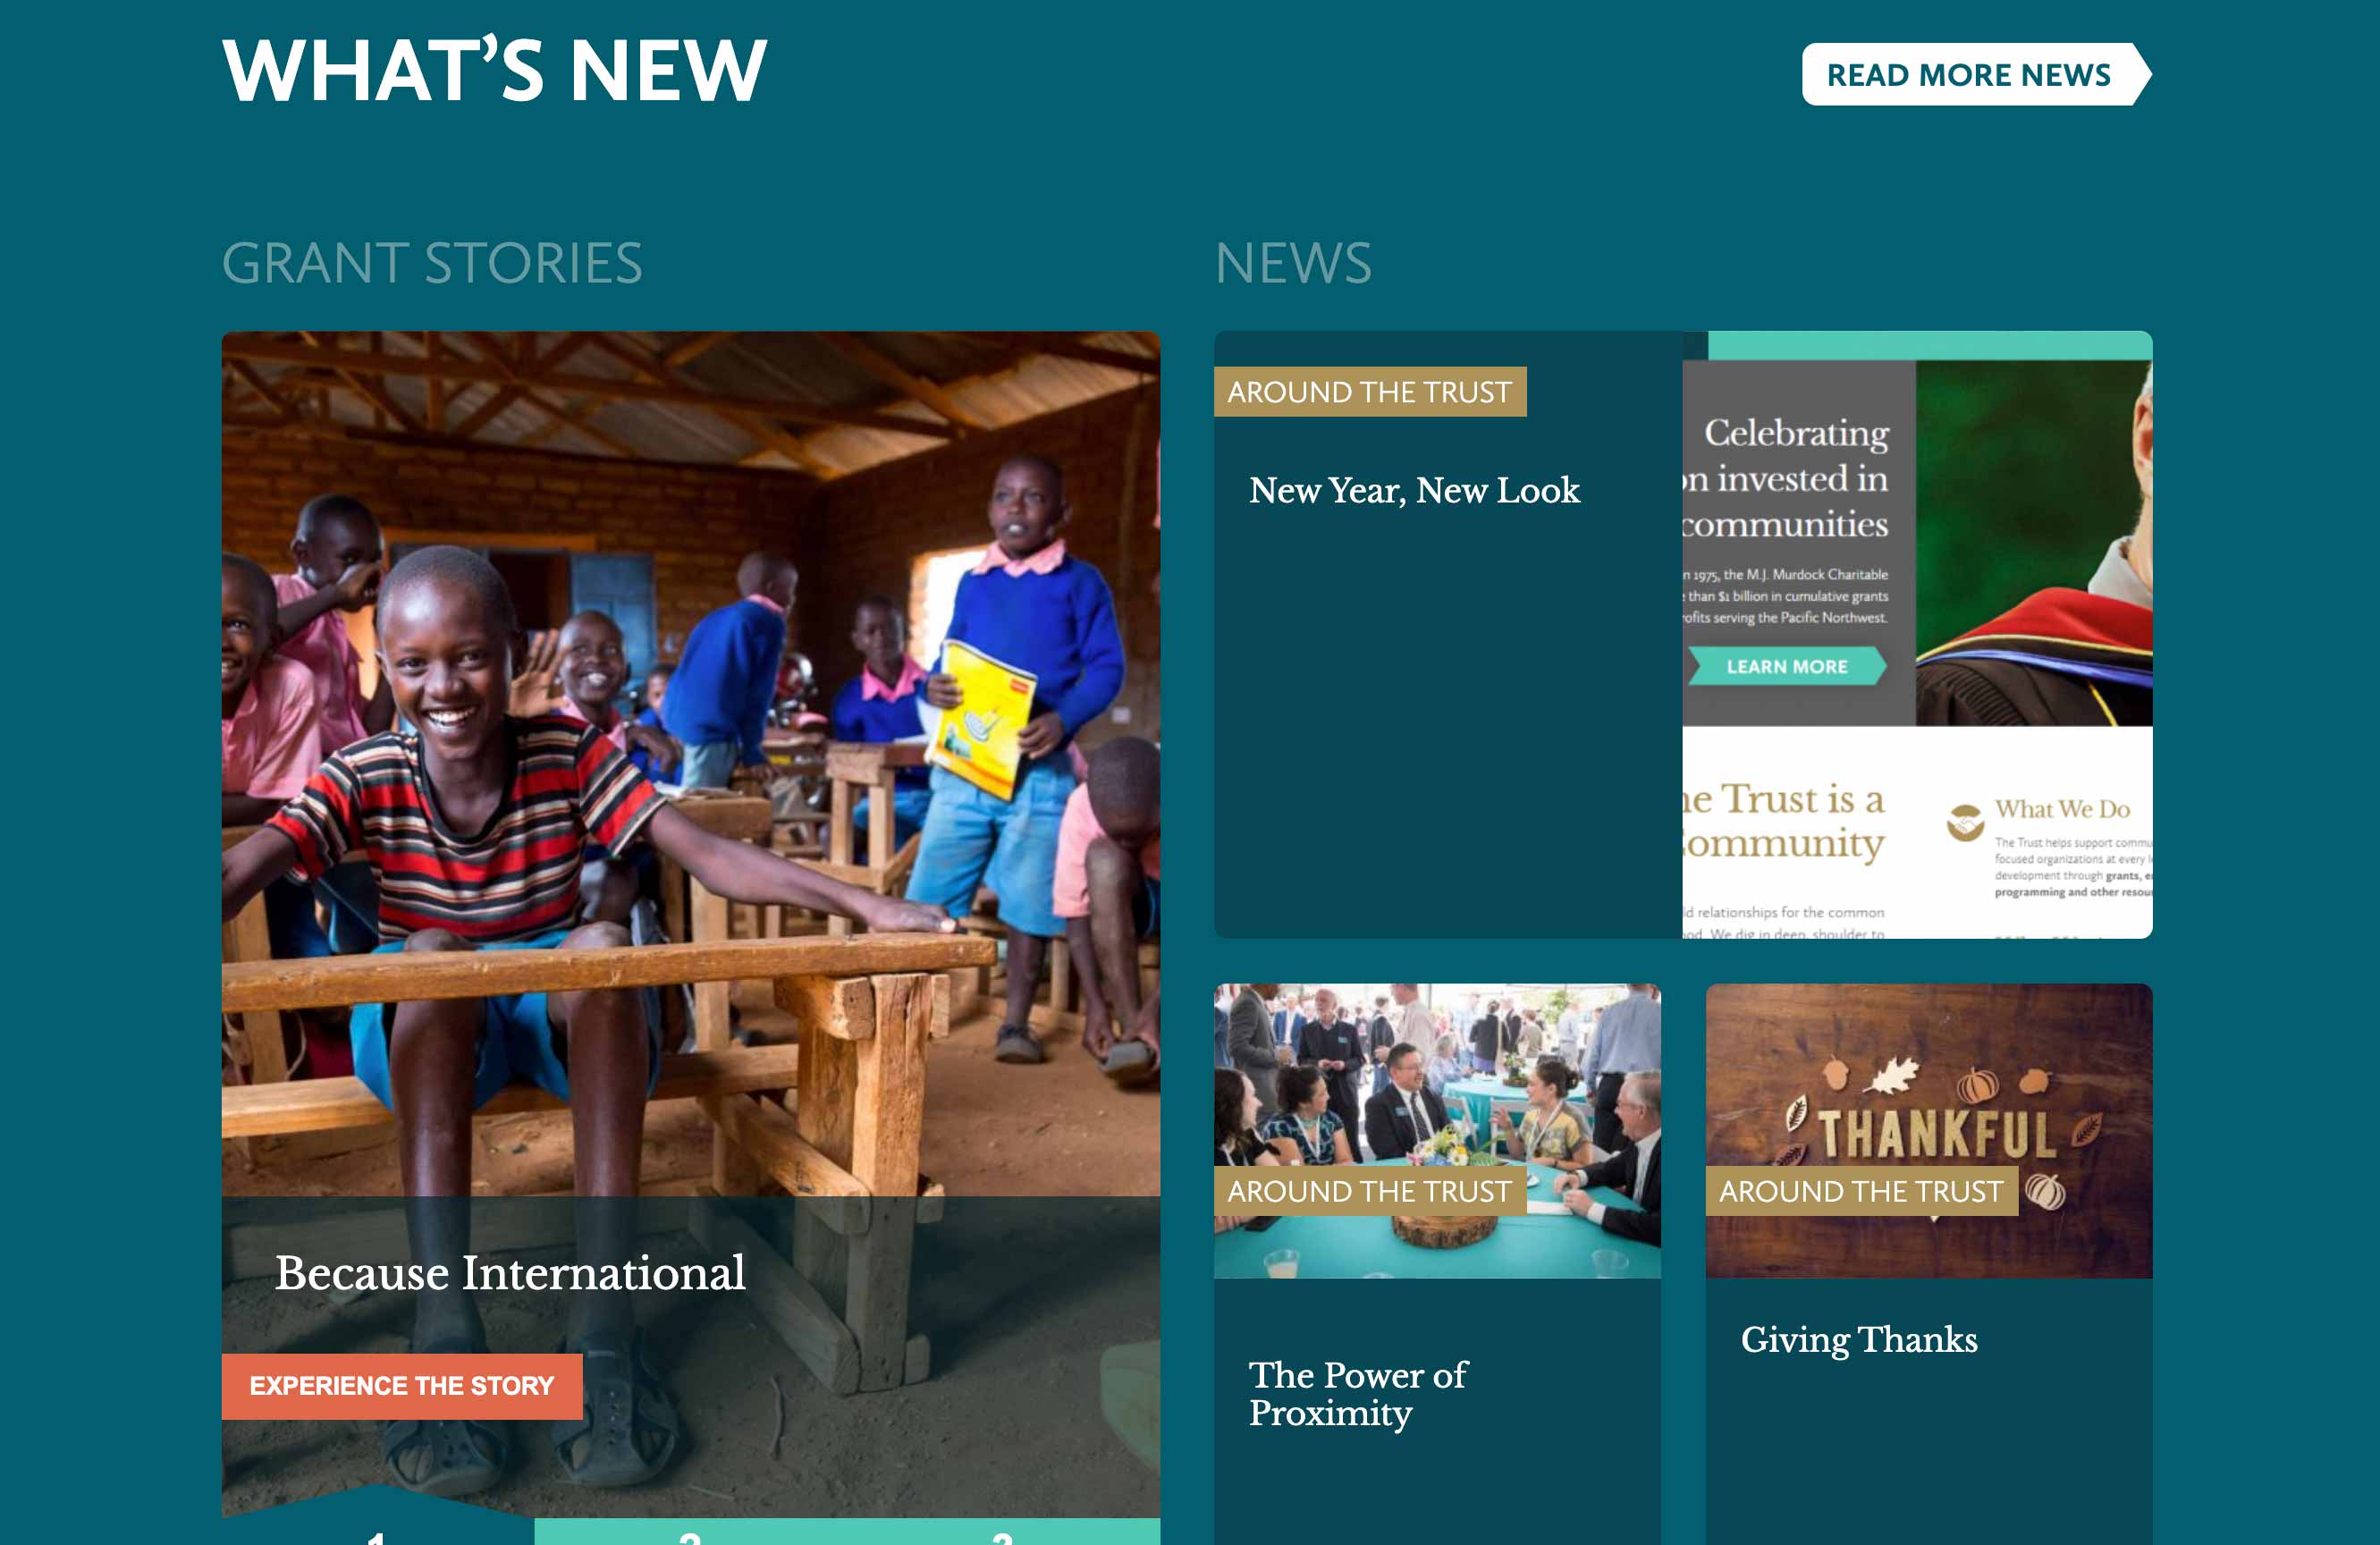 A screen of the M.J. Murdock Charitable Trust website, with the words "WHAT'S NEW" above a section titled "Grant Stories" and another section titled "News". 